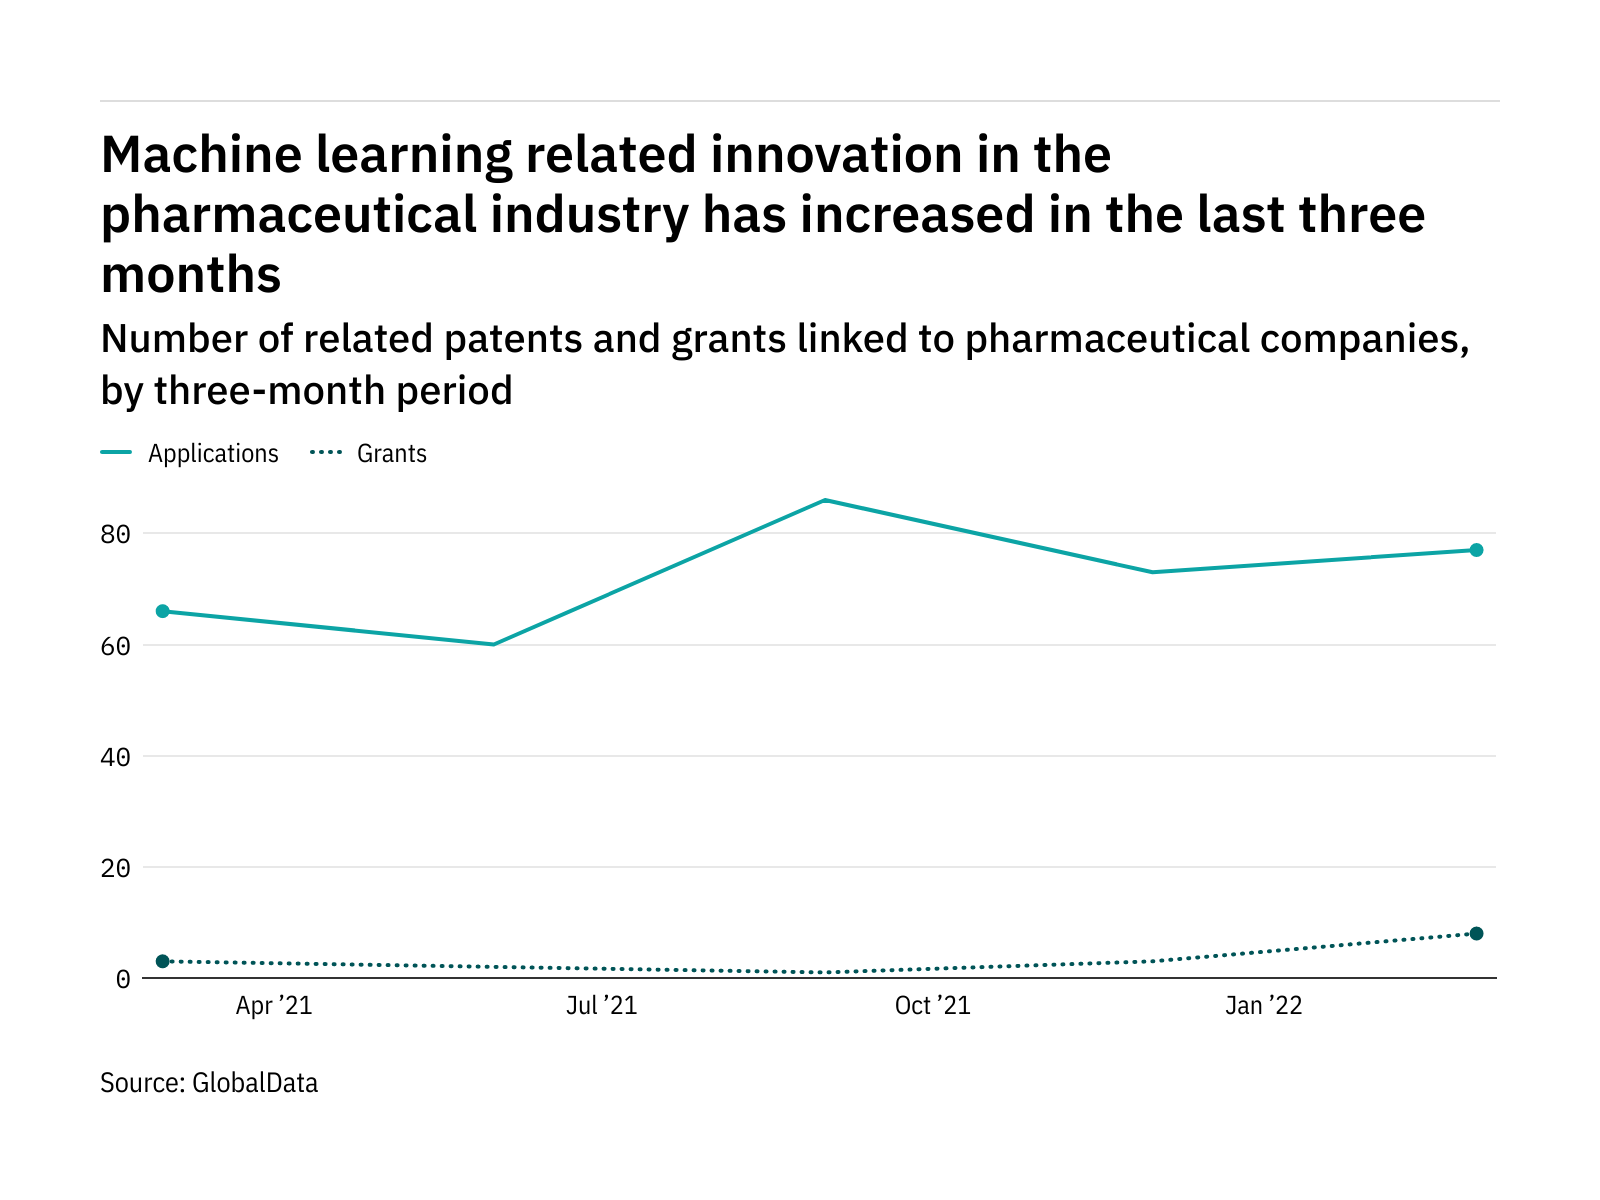 Pharmaceutical industry companies are increasingly innovating in machine learning